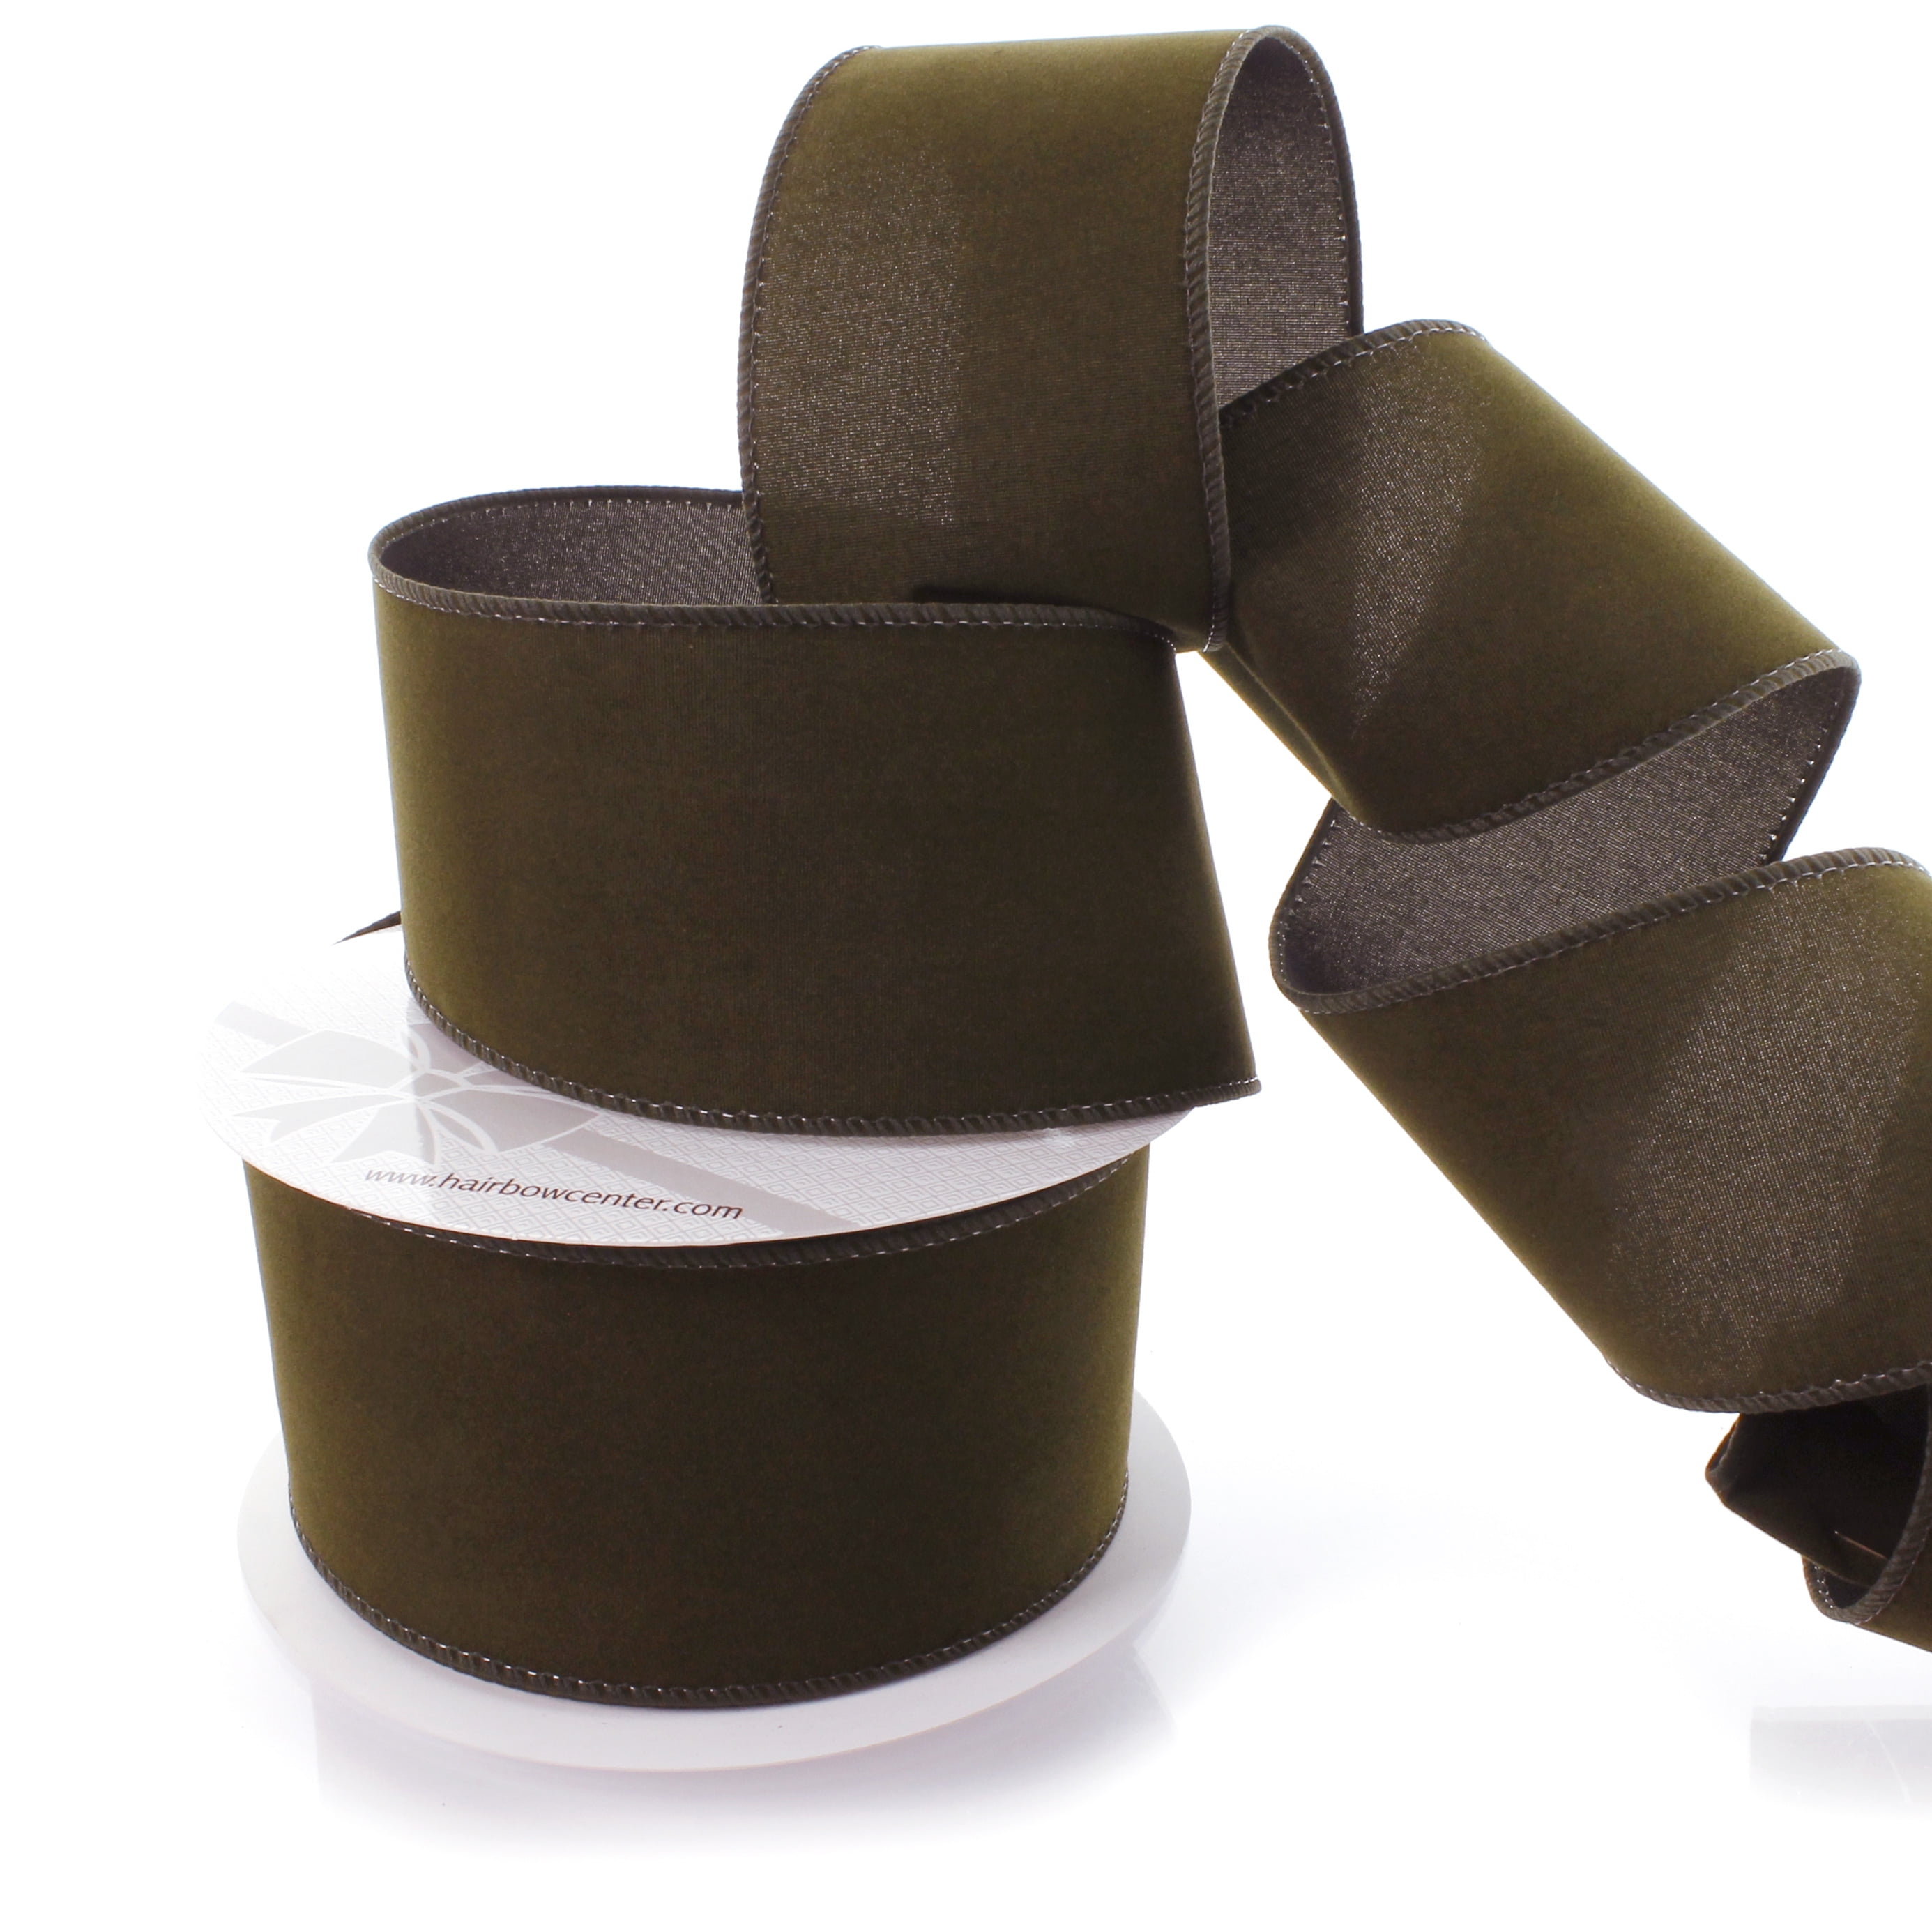 Olive Green Wired Craft Ribbon 2.5 x 20 Yards